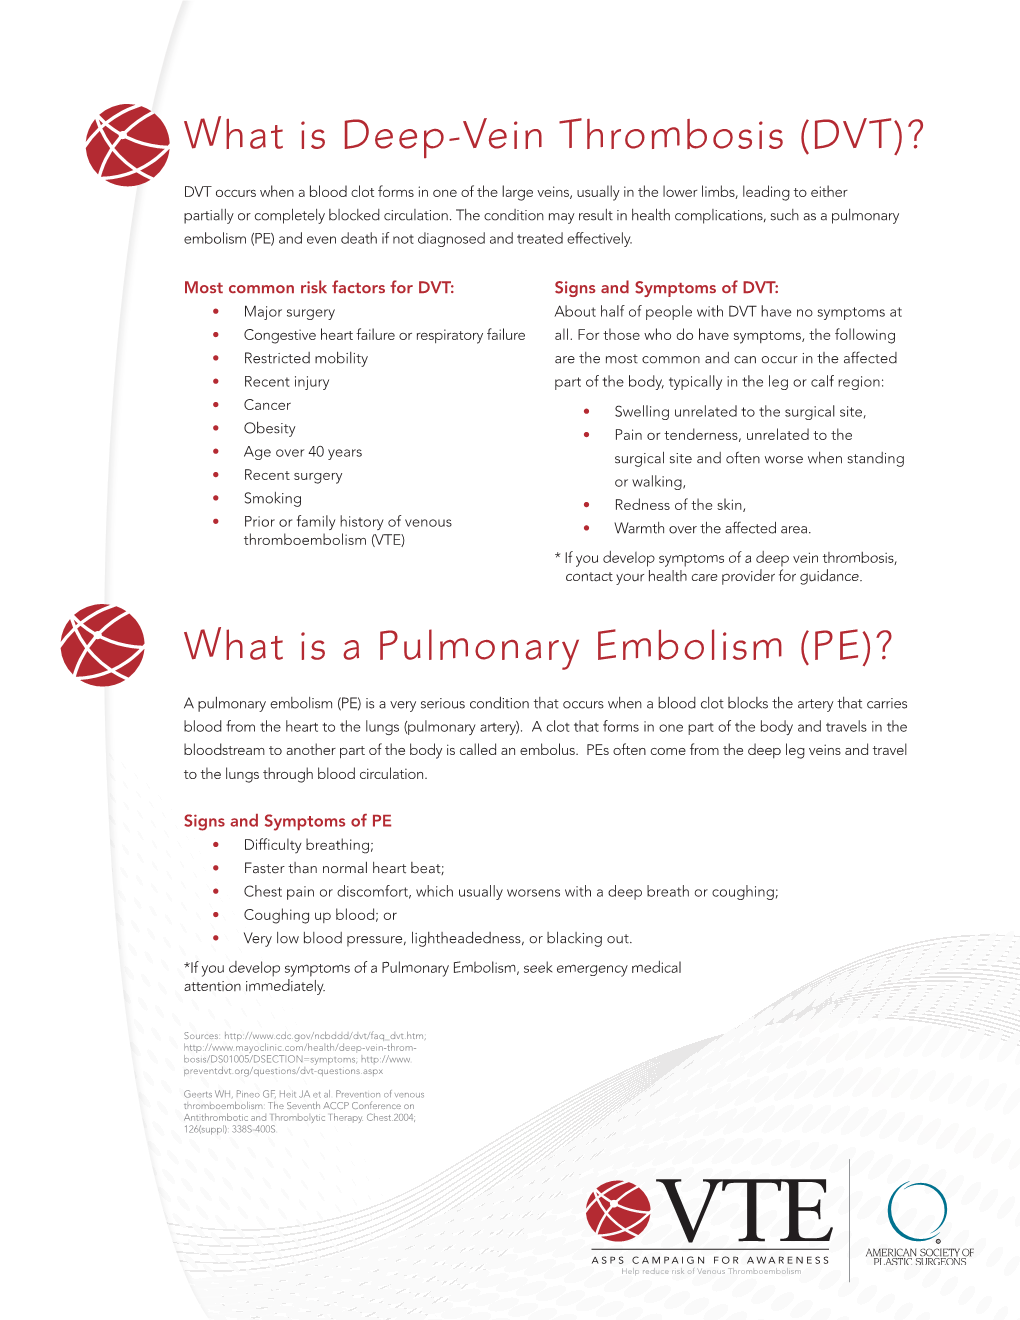 What Is Deep-Vein Thrombosis (DVT)? What Is a Pulmonary